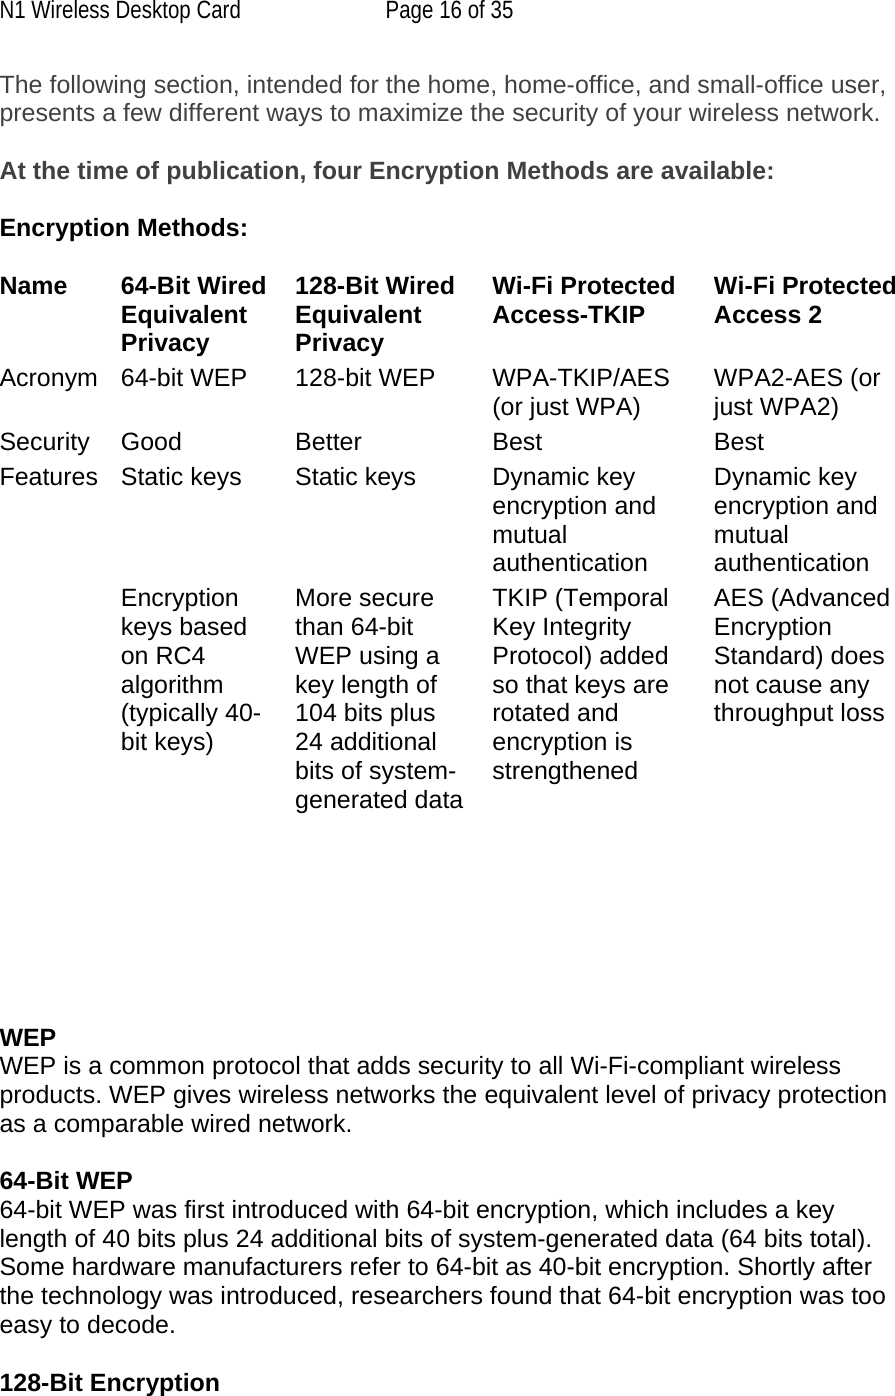 N1 Wireless Desktop Card  Page 16 of 35 The following section, intended for the home, home-office, and small-office user, presents a few different ways to maximize the security of your wireless network.  At the time of publication, four Encryption Methods are available:  Encryption Methods:  Name 64-Bit Wired Equivalent Privacy128-Bit Wired Equivalent PrivacyWi-Fi Protected Access-TKIP Wi-Fi Protected Access 2 Acronym 64-bit WEP 128-bit WEP WPA-TKIP/AES (or just WPA) WPA2-AES (or just WPA2)Security Good Better Best BestFeatures Static keys  Static keys  Dynamic key encryption and mutual authenticationDynamic key encryption and mutual authentication Encryption keys based on RC4 algorithm (typically 40-bit keys)More secure than 64-bit WEP using a key length of 104 bits plus 24 additional bits of system-generated dataTKIP (Temporal Key Integrity Protocol) added so that keys are rotated and encryption is strengthenedAES (Advanced Encryption Standard) does not cause any throughput loss      WEP  WEP is a common protocol that adds security to all Wi-Fi-compliant wireless products. WEP gives wireless networks the equivalent level of privacy protection as a comparable wired network.  64-Bit WEP 64-bit WEP was first introduced with 64-bit encryption, which includes a key length of 40 bits plus 24 additional bits of system-generated data (64 bits total). Some hardware manufacturers refer to 64-bit as 40-bit encryption. Shortly after the technology was introduced, researchers found that 64-bit encryption was too easy to decode.  128-Bit Encryption 